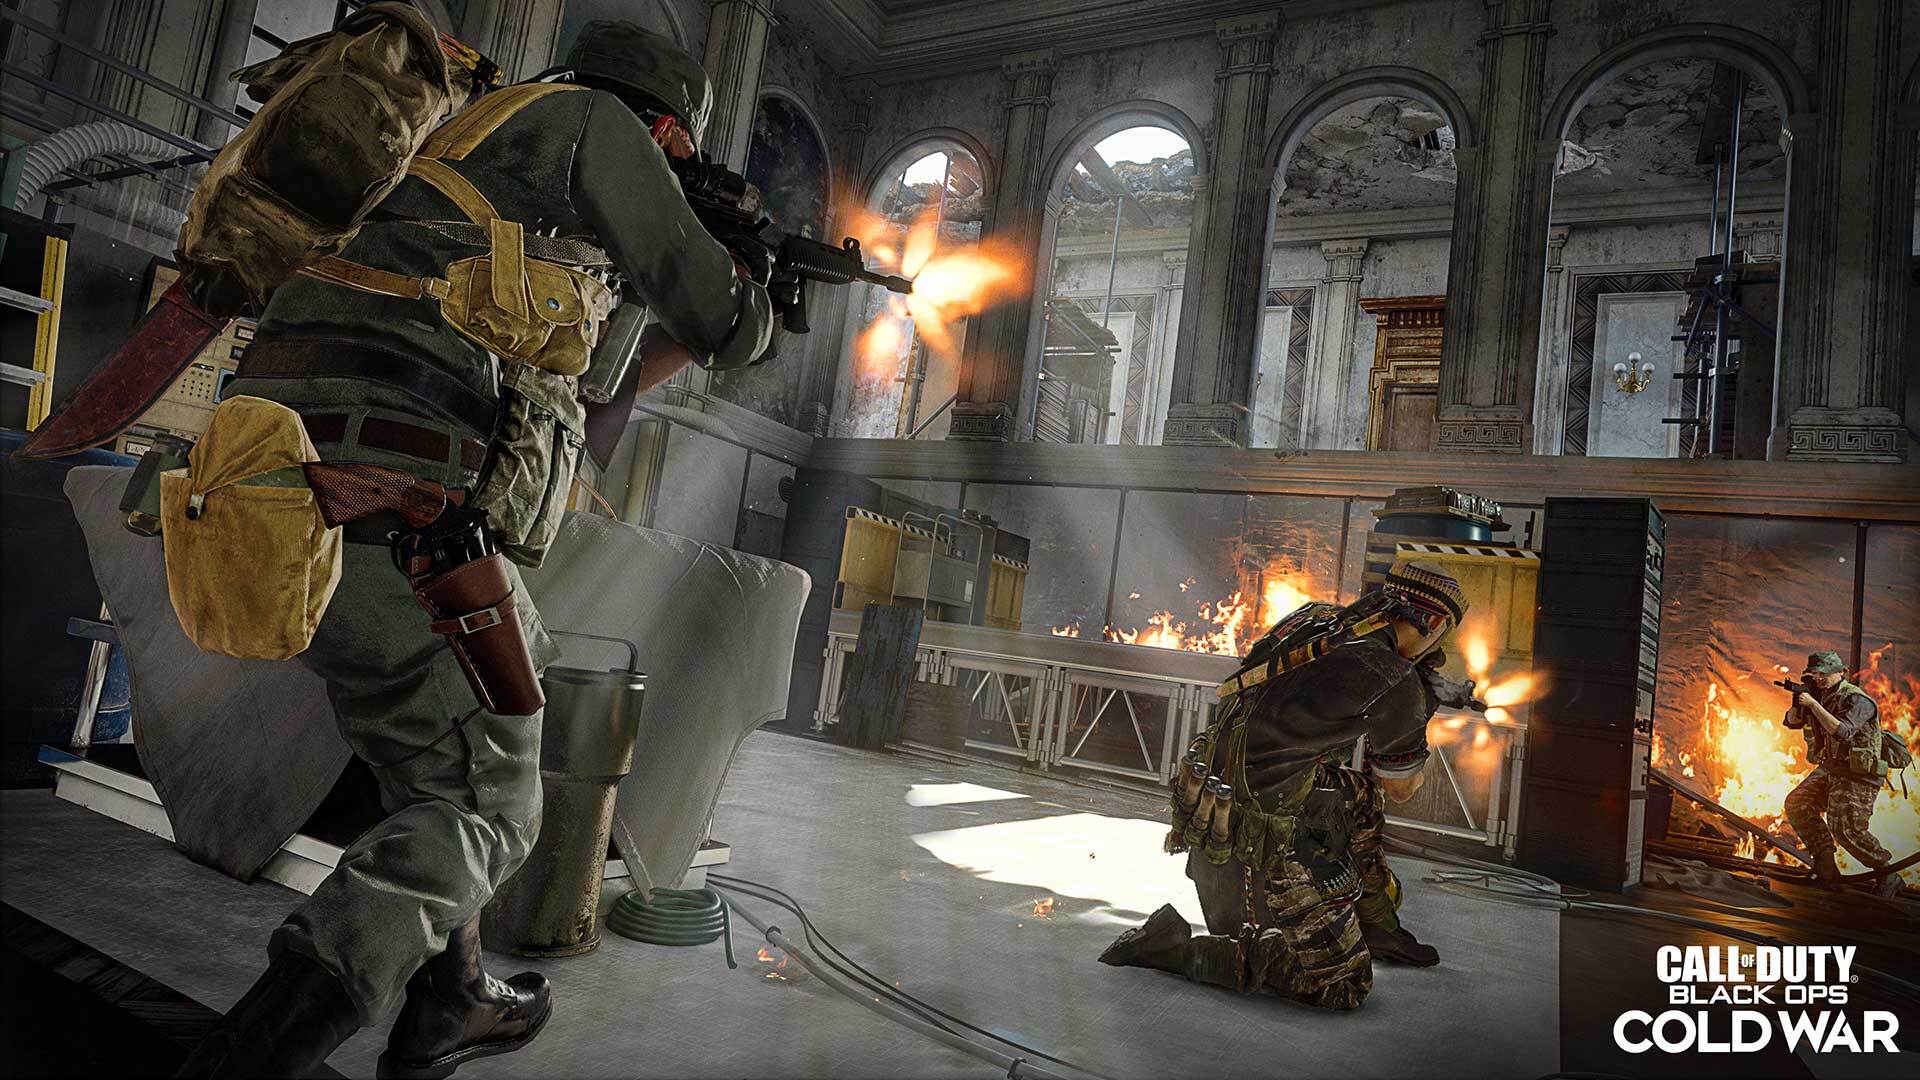 Gunfight Tournament mode comes to Call of Duty Black Ops Cold War this